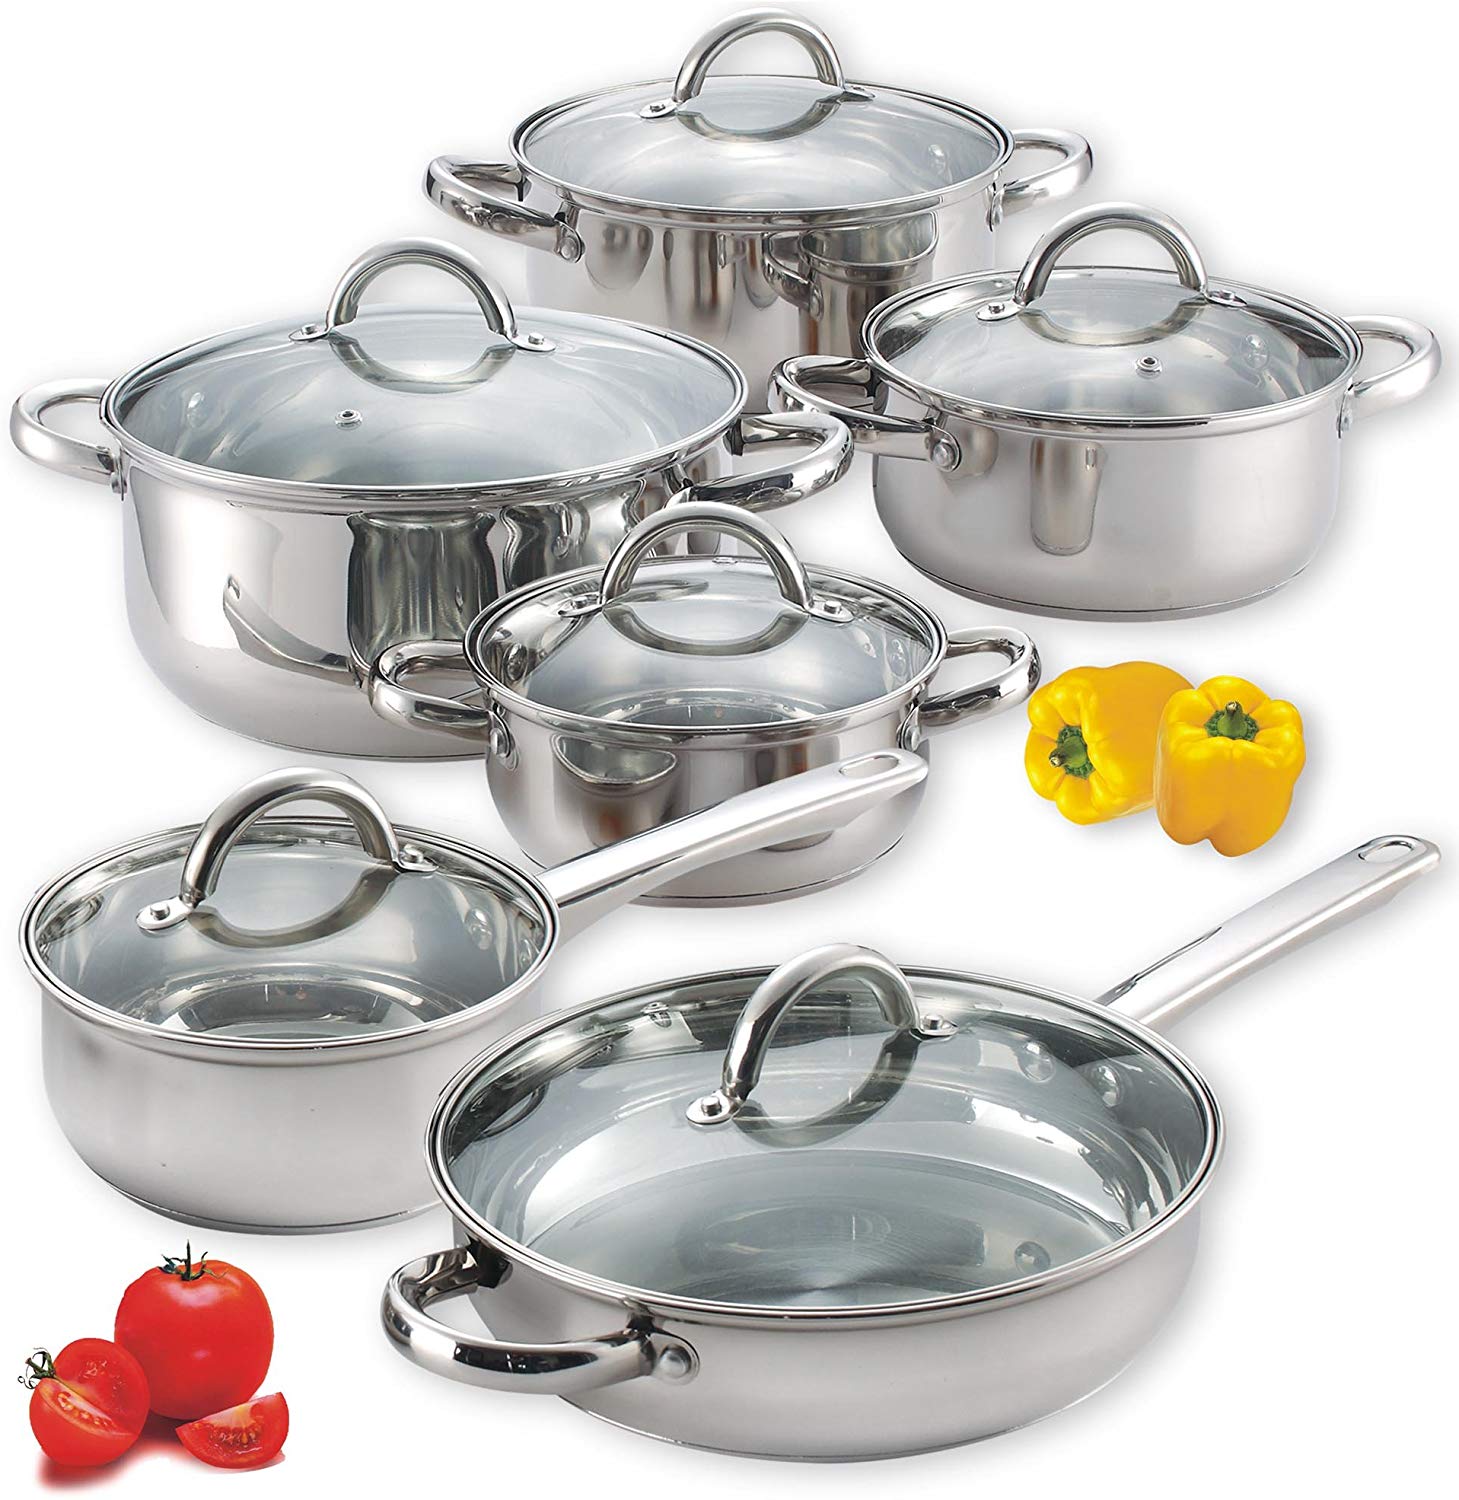 Cook N Home NC-00250 Glass Lids Stainless Steel Cookware Set, 12-Piece